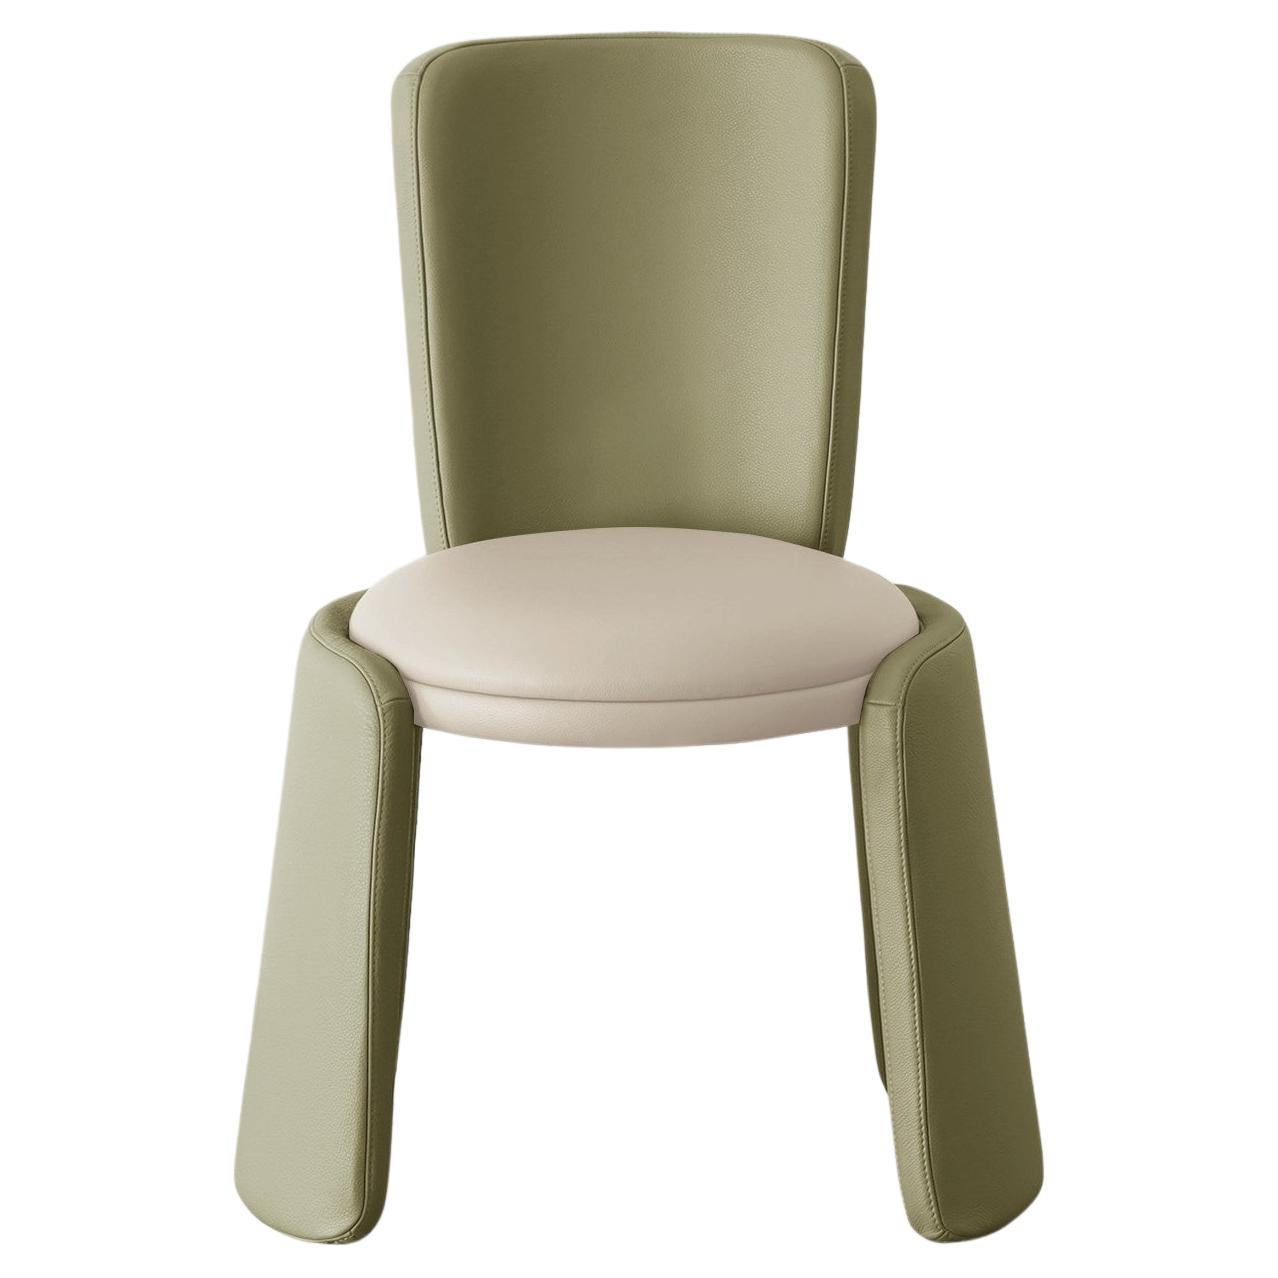 Inge Contemporary Chair Fully Upholstered